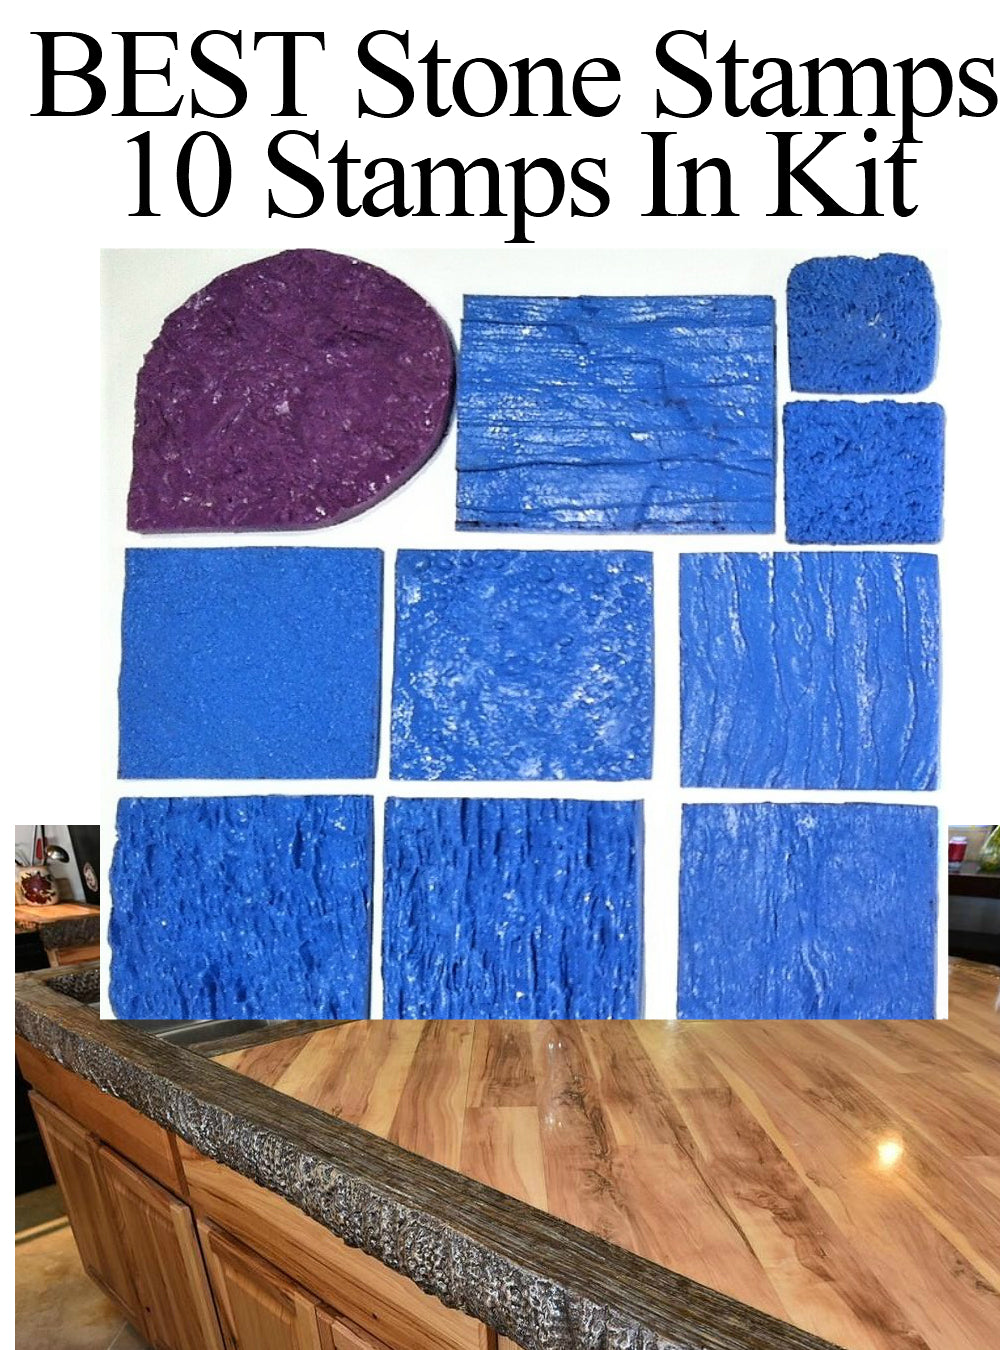 Best Concrete Stone Stamp Kit - Small Hand Stamps 7", 6", 3"